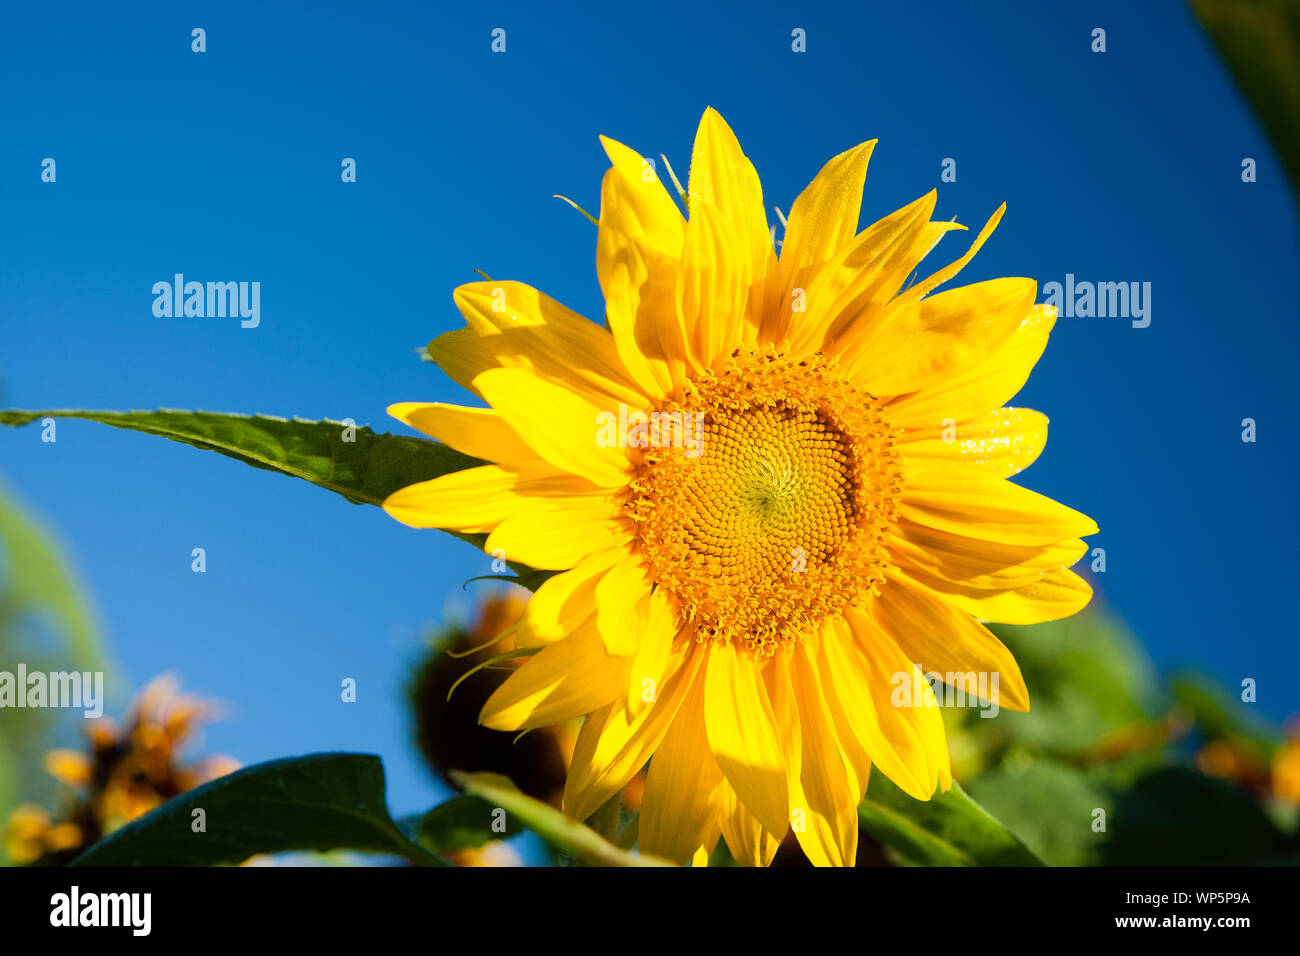 Close-up of a sunflower against a blue sky. Stock Photo